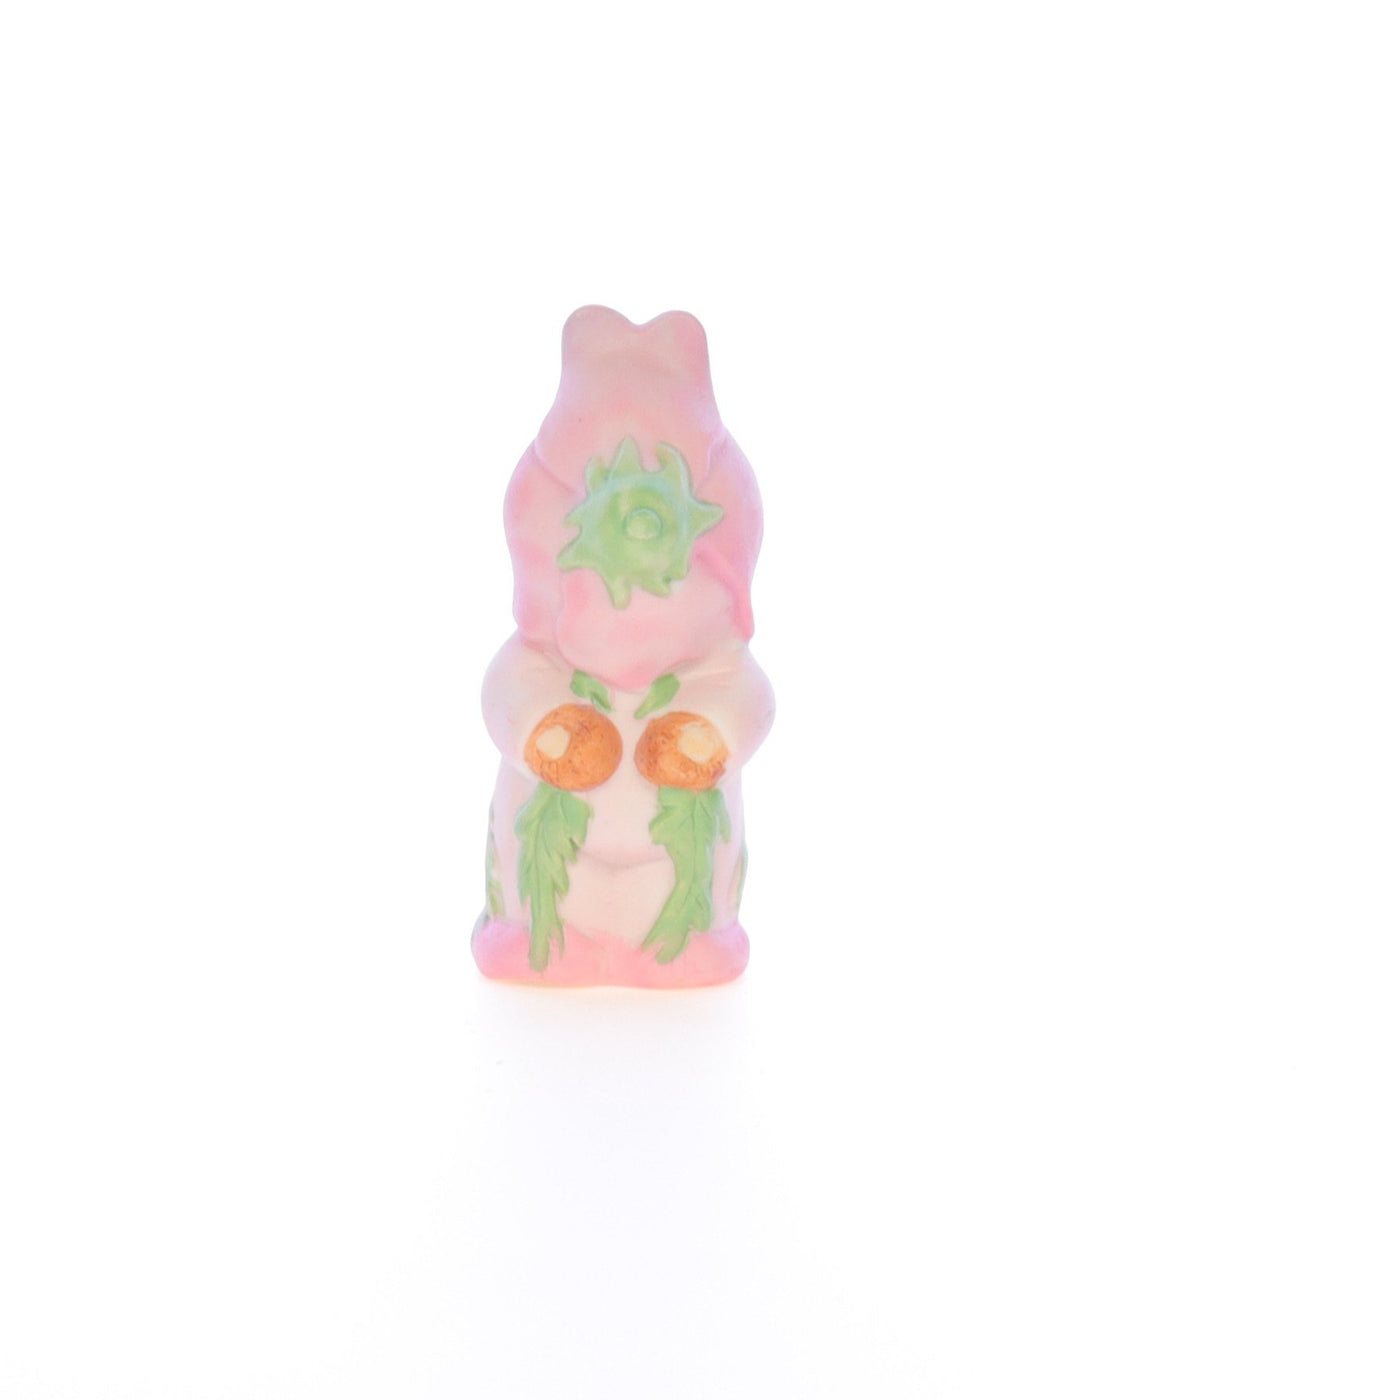 Lucy_And_Me_by_Lucy_Atwell_Porcelain_Figurine_Bear_with_Pink_Flower_Costume_Lucy_Unknown_011_05